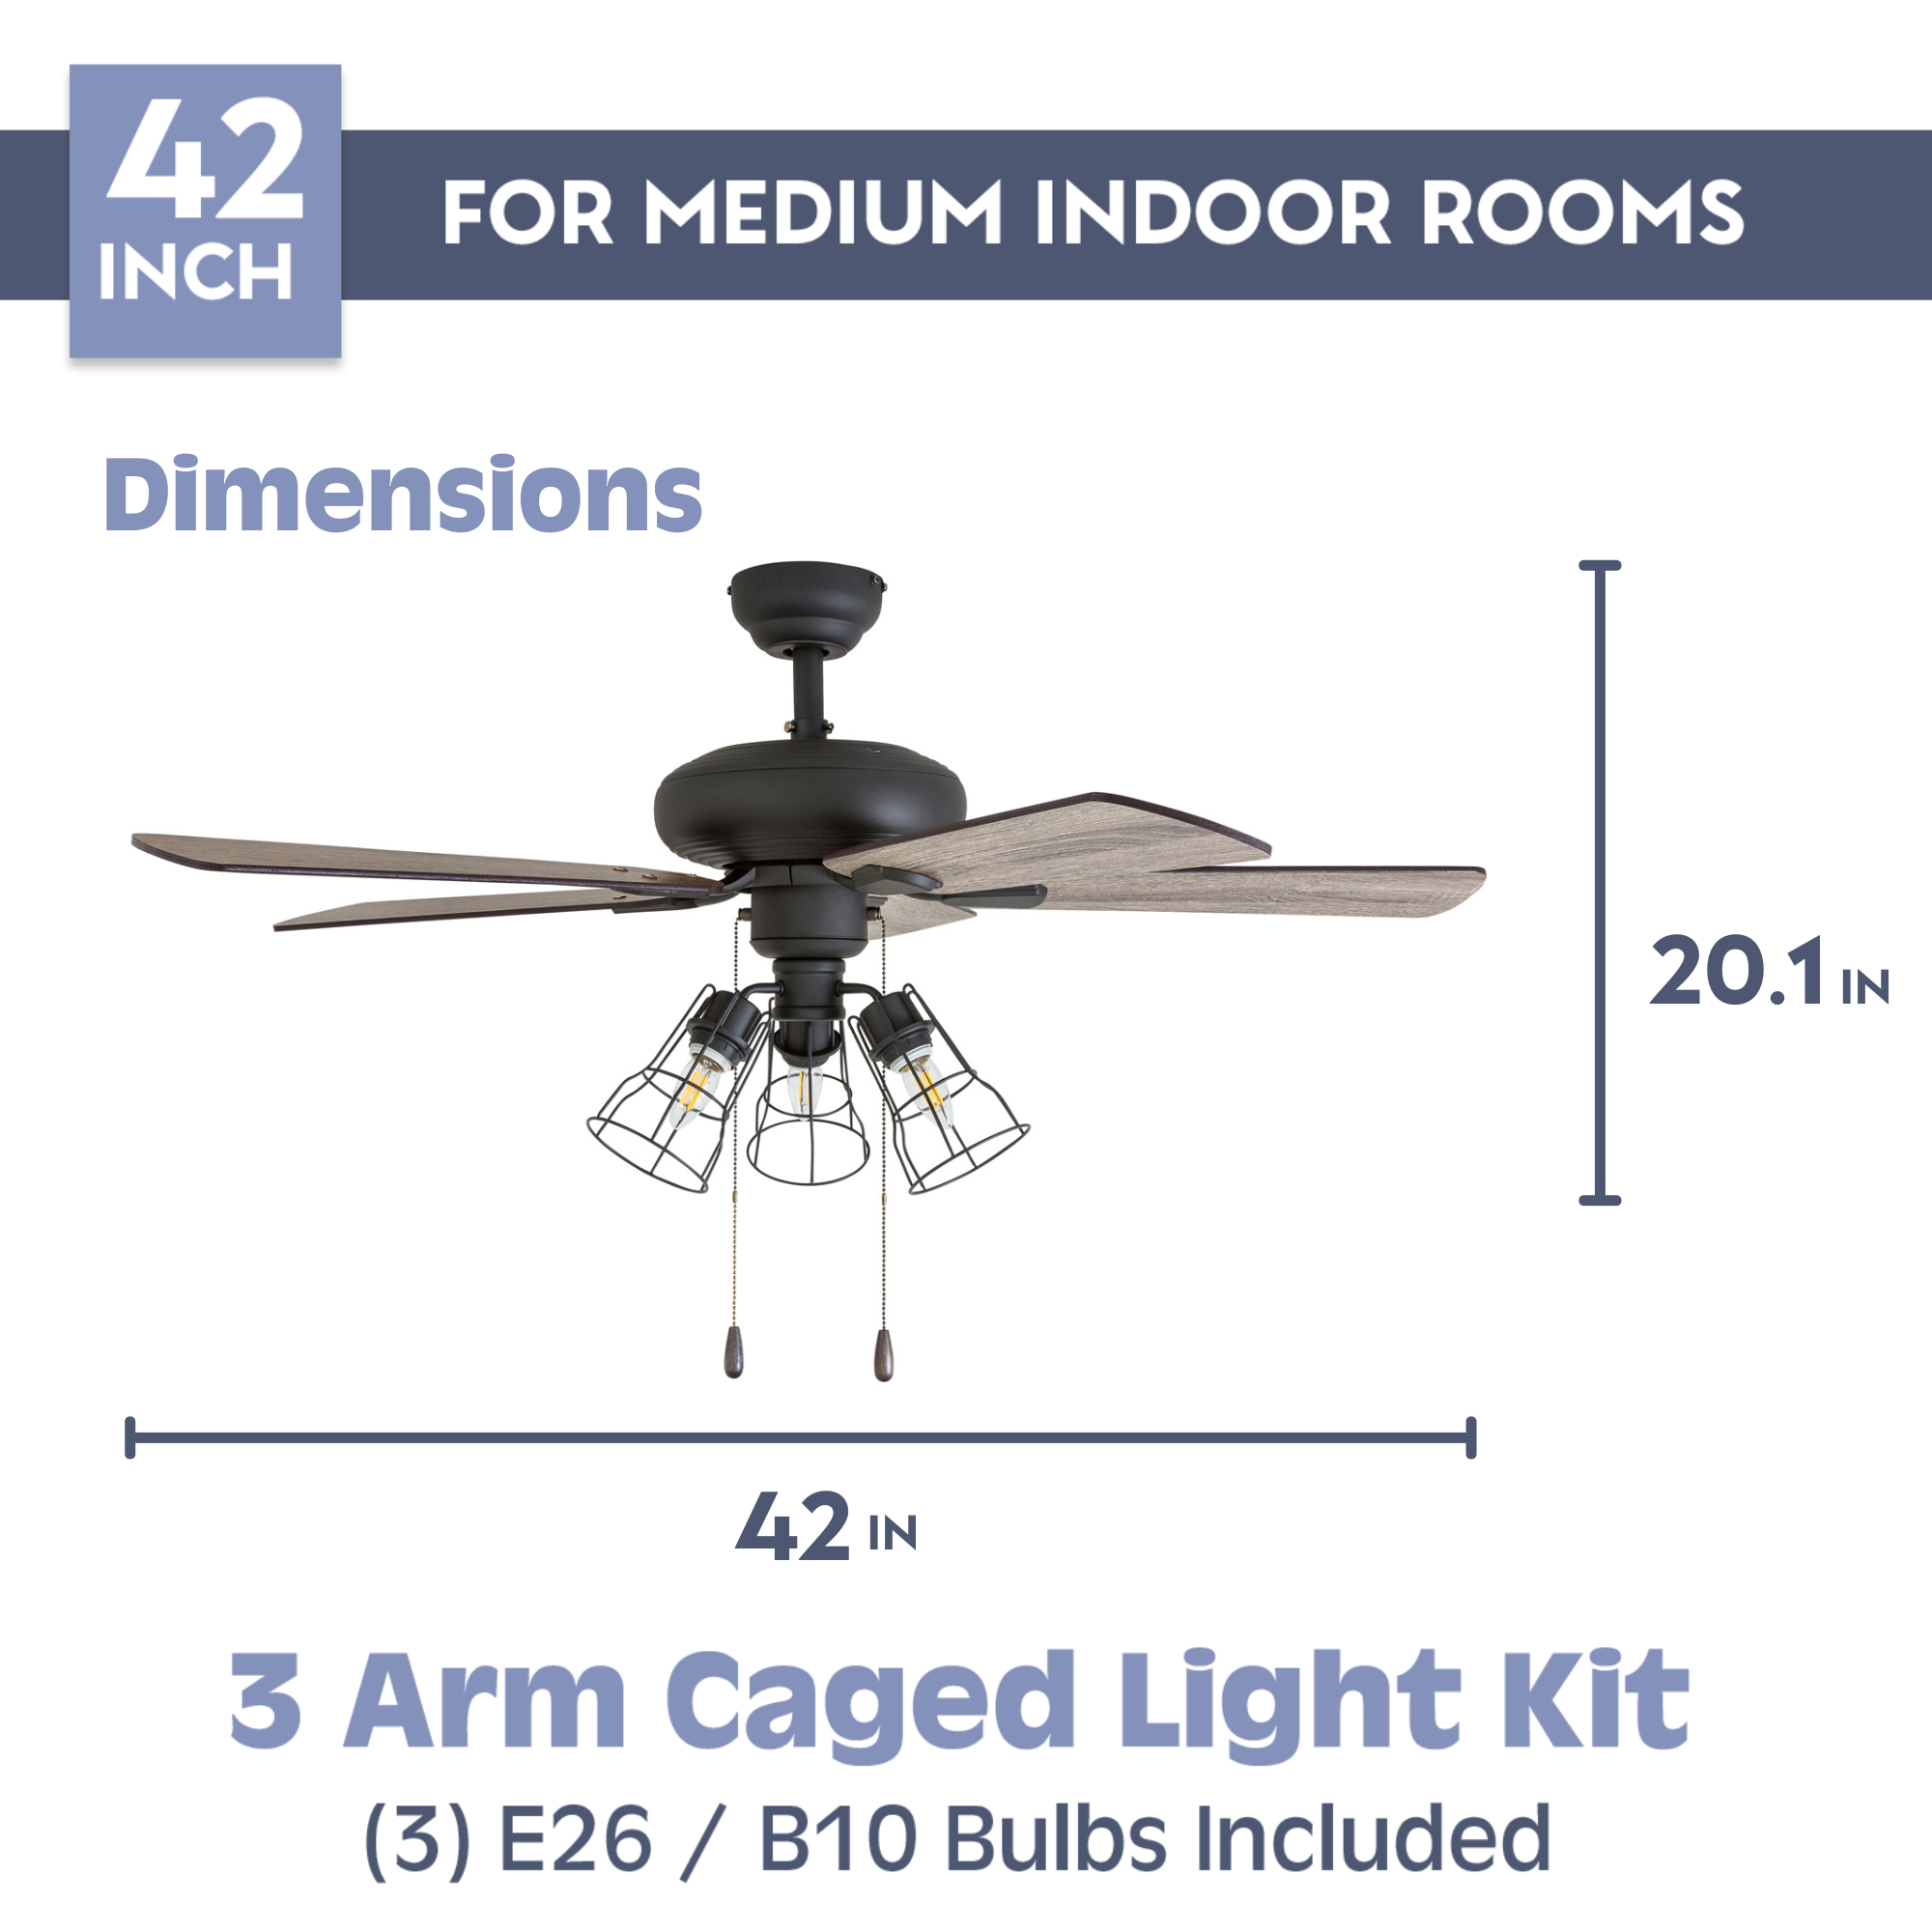 42 Inch Madison County, Bronze, Pull Chain, Ceiling Fan by Prominence Home